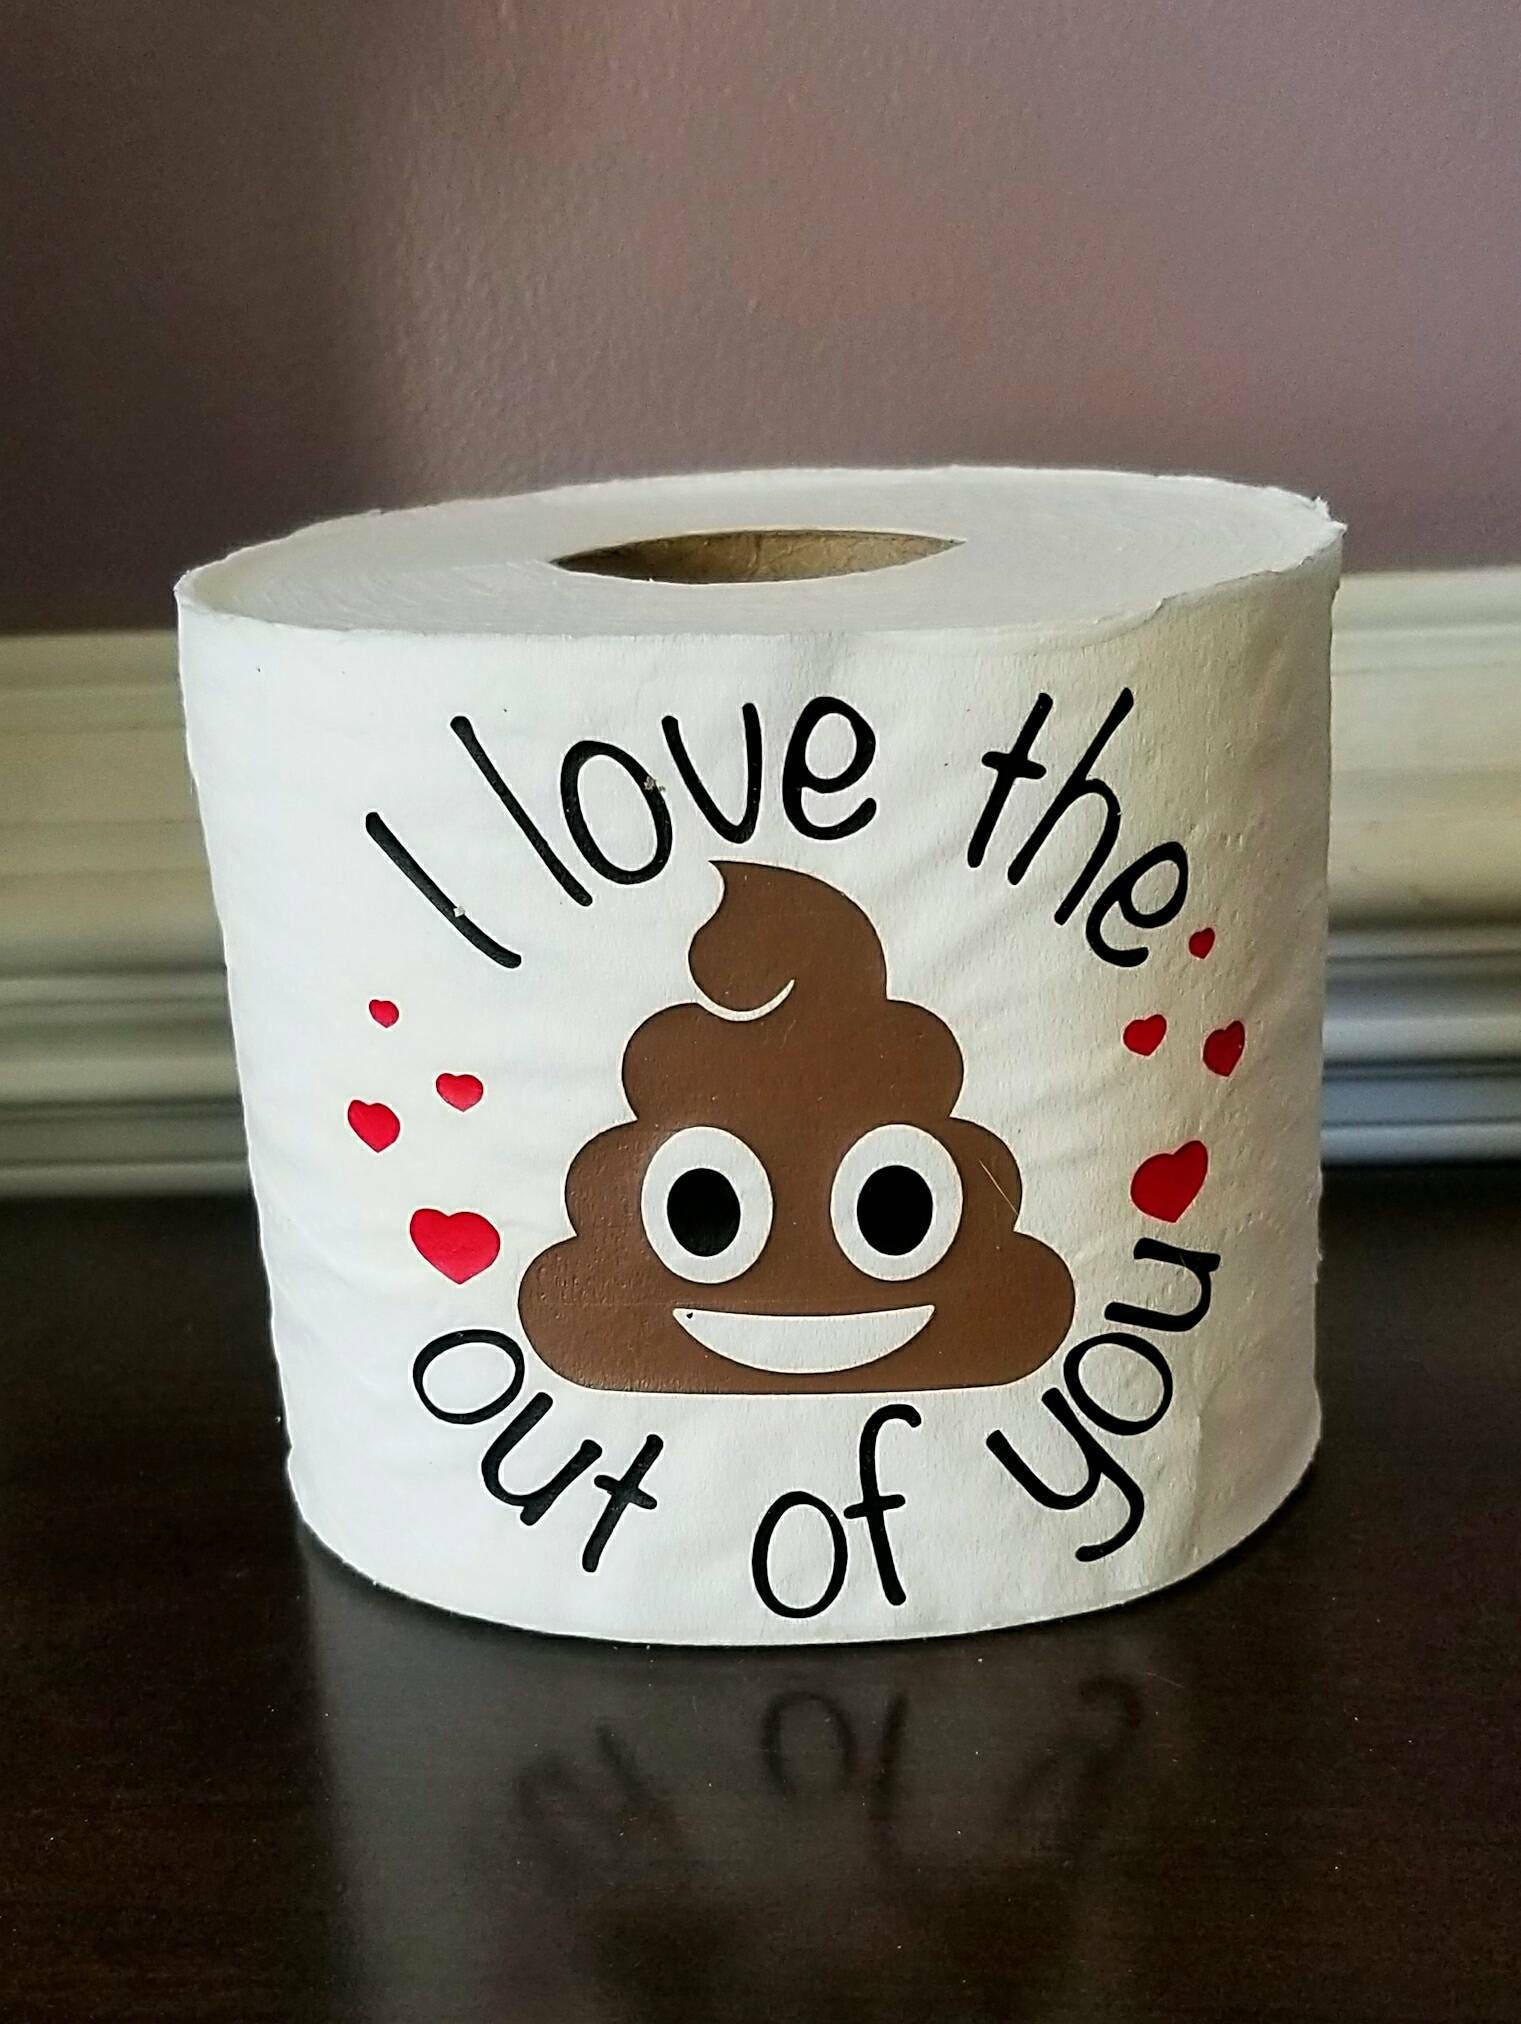 2 Rolls Toilet Paper I Love The Poop Outta You Printed Toilet Paper Romantic Novelty 2-Ply Toilet Tissue Funny Gag Gift for Anniversary Decorations